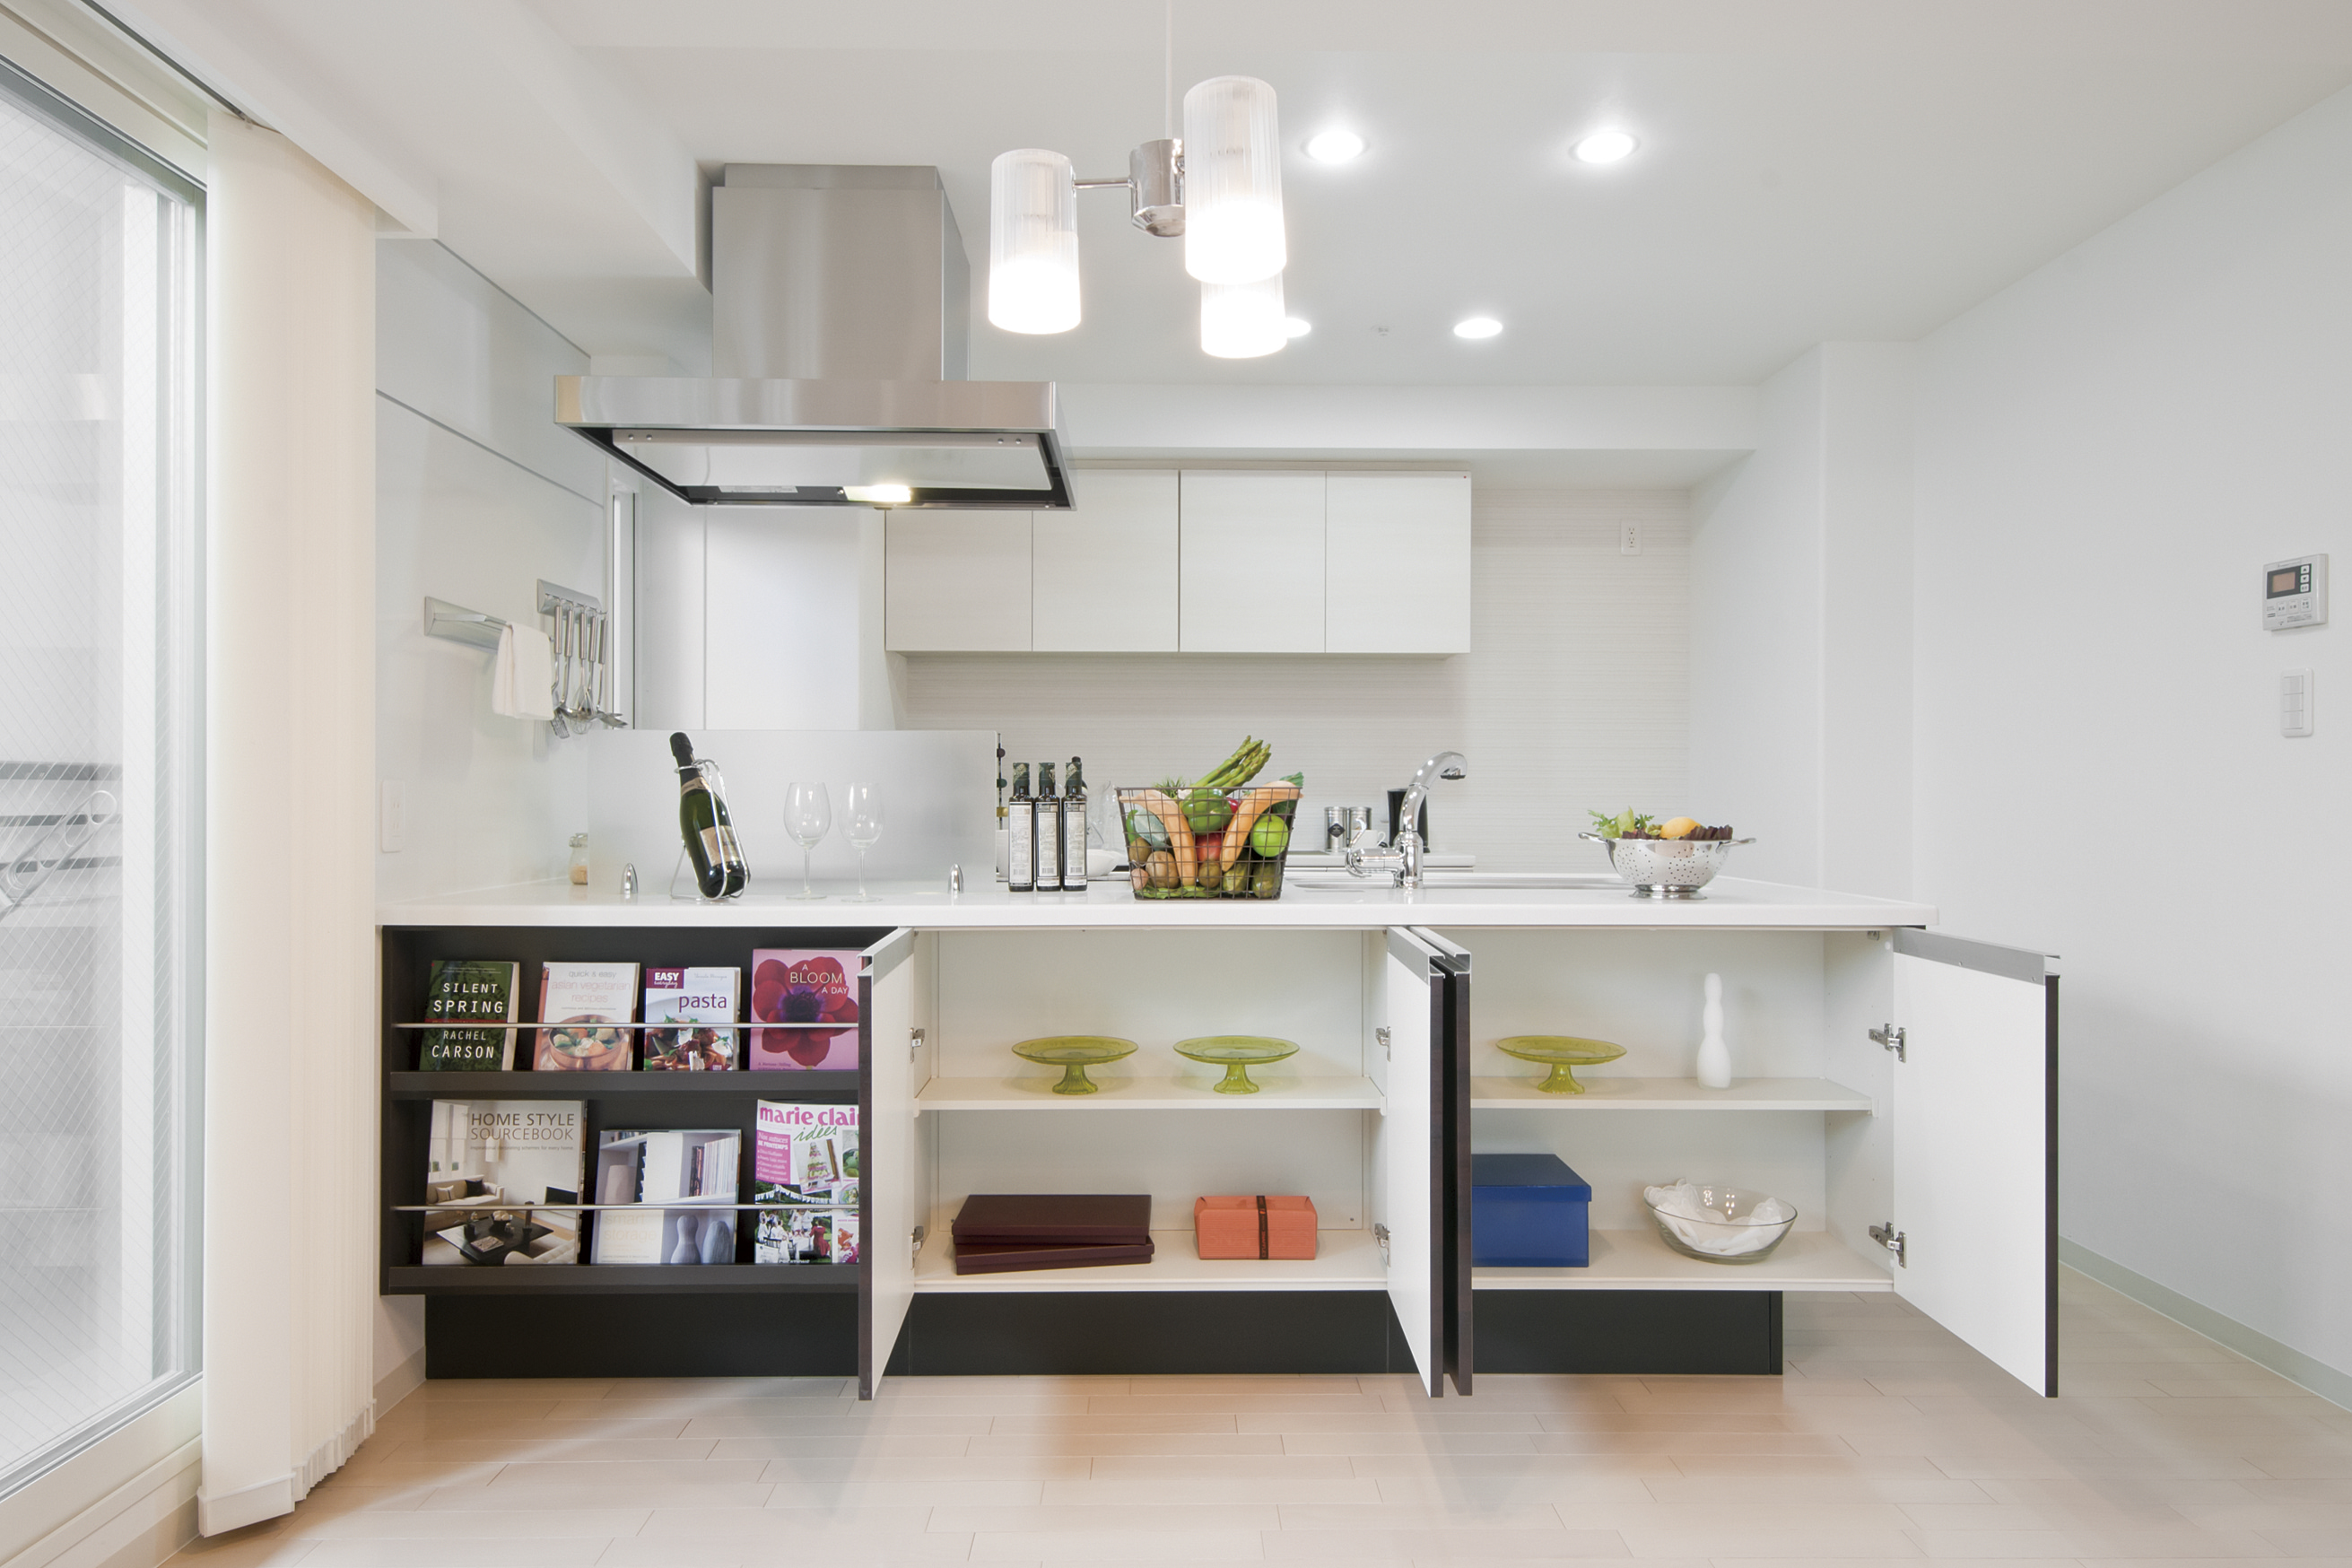 Dining surface of the kitchen has become the storage & book rack. After breakfast, Convenient to put the newspaper of Yomikake. Since storage is a shelf with a coffee maker and mugs, You can put away side-by-side stock of sugar is also easy to use